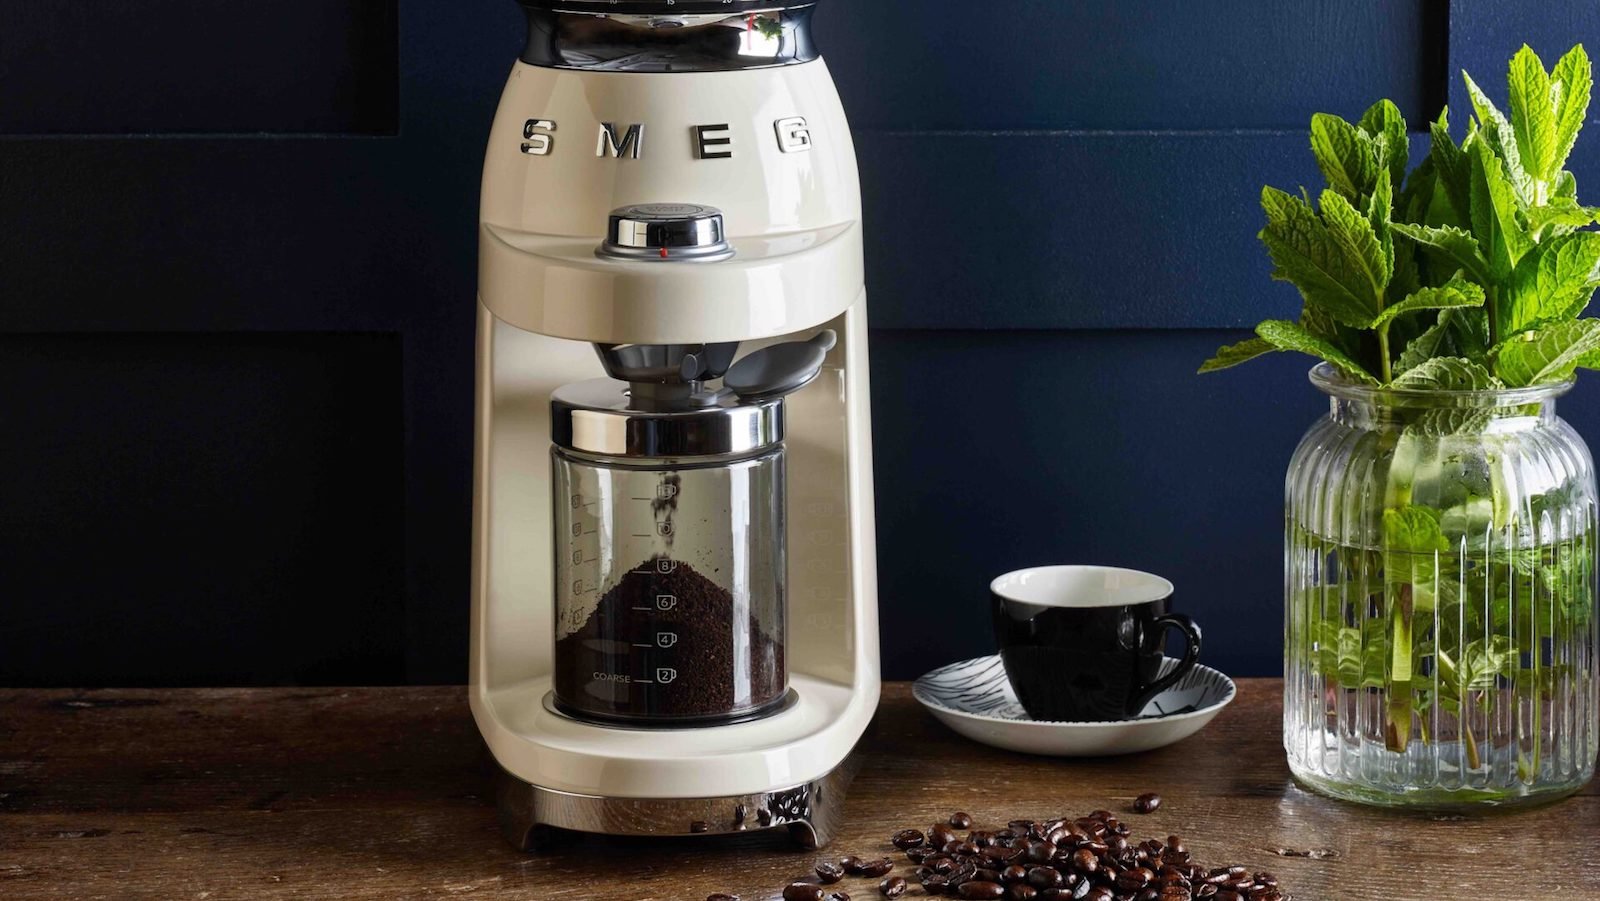 Smeg CGF01 Coffee Grinder adds a sleek look to your kitchen & offers high-quality grinding